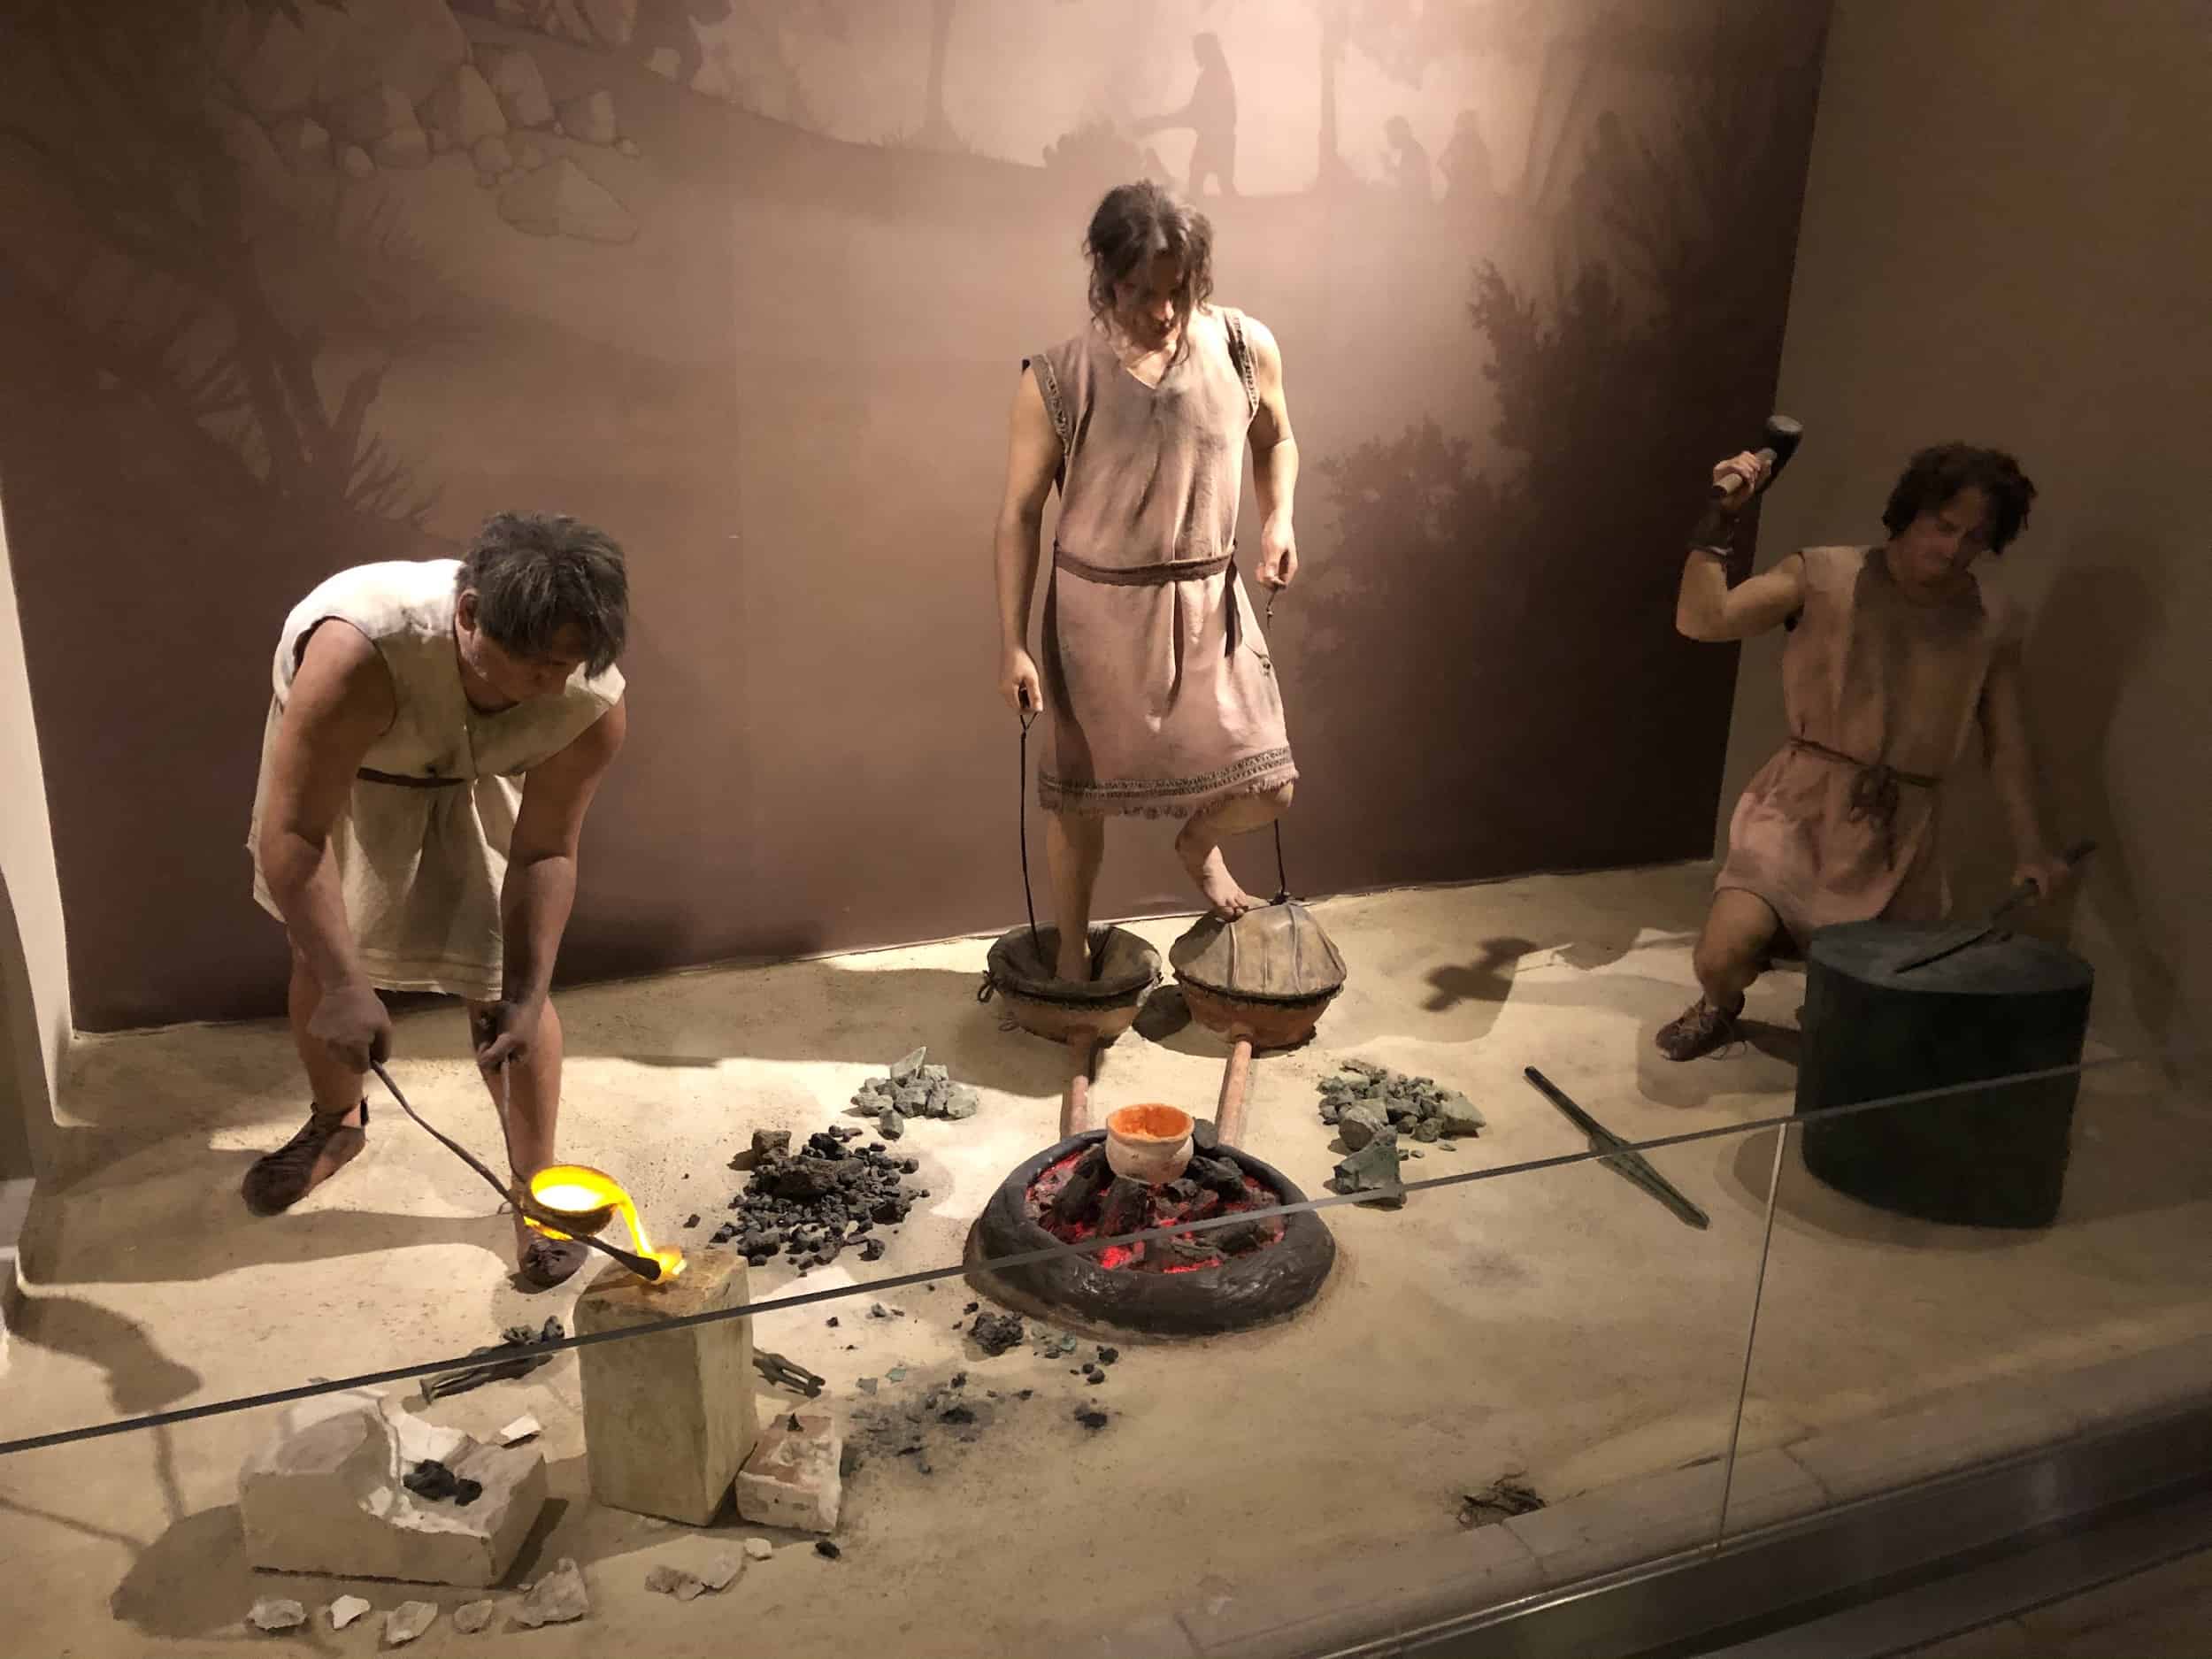 Early Bronze Age display at the Museum of Anatolian Civilizations in Ankara, Turkey